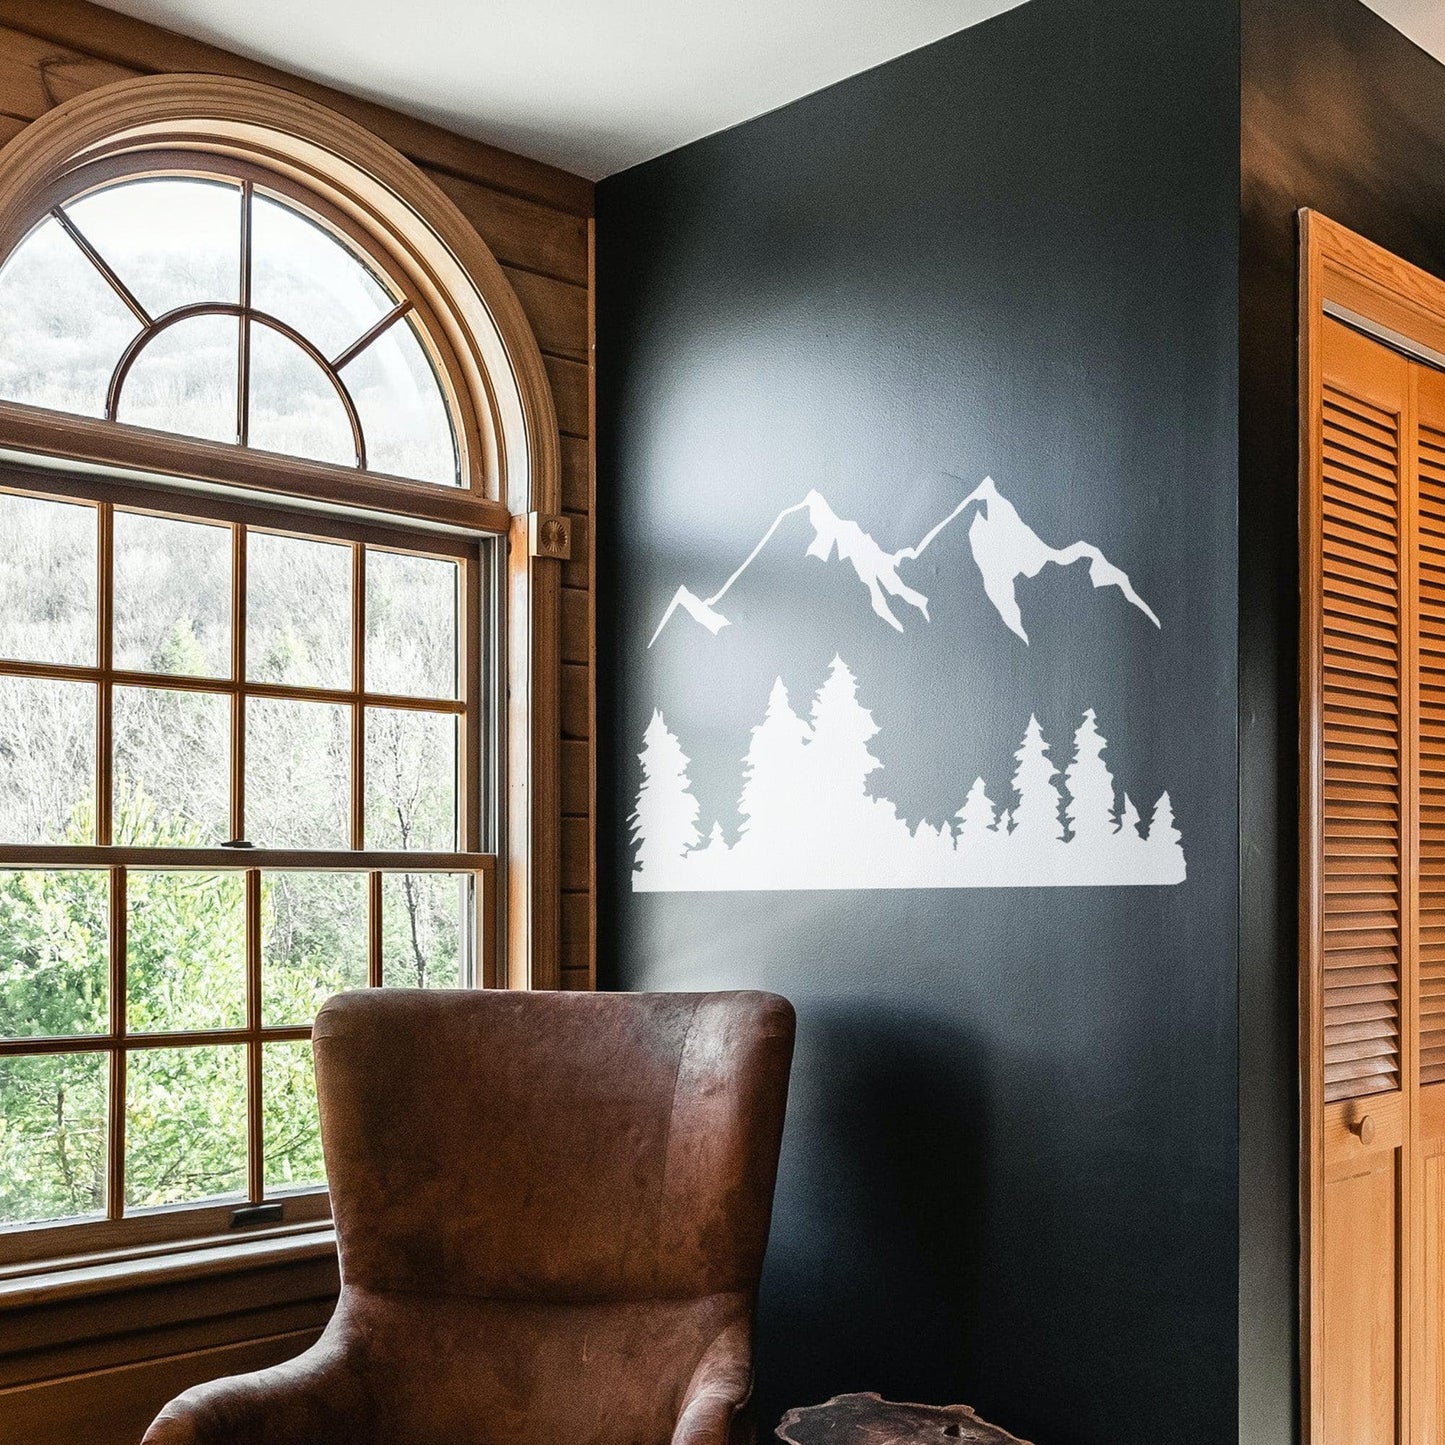 White mountain decal on a black wall above an armchair.